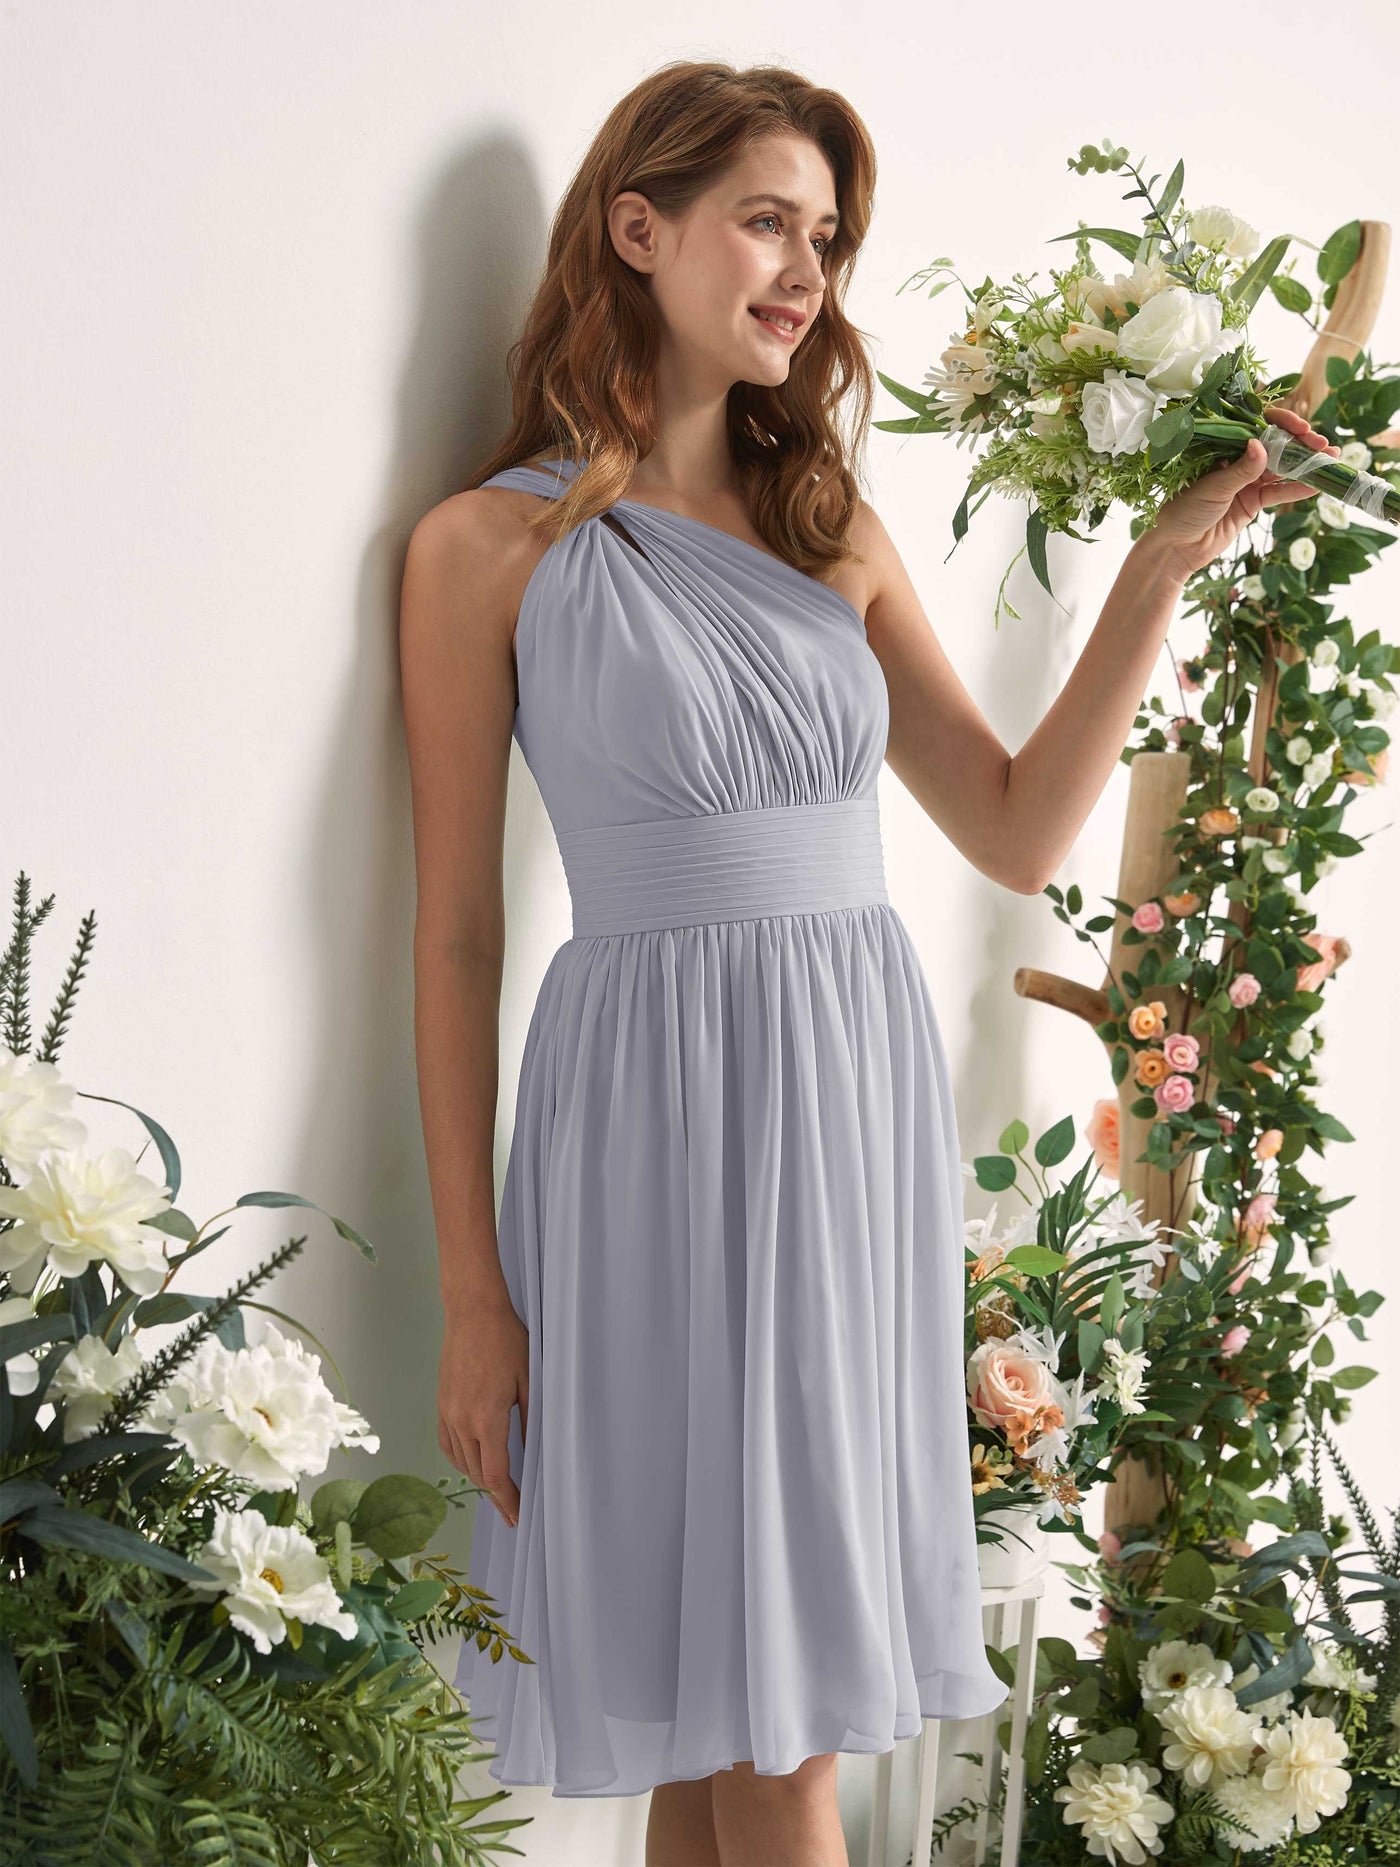 Bridesmaid Dress A-line Chiffon One Shoulder Knee Length Sleeveless Wedding Party Dress - Dusty Lavender (81221203)#color_dusty-lavender